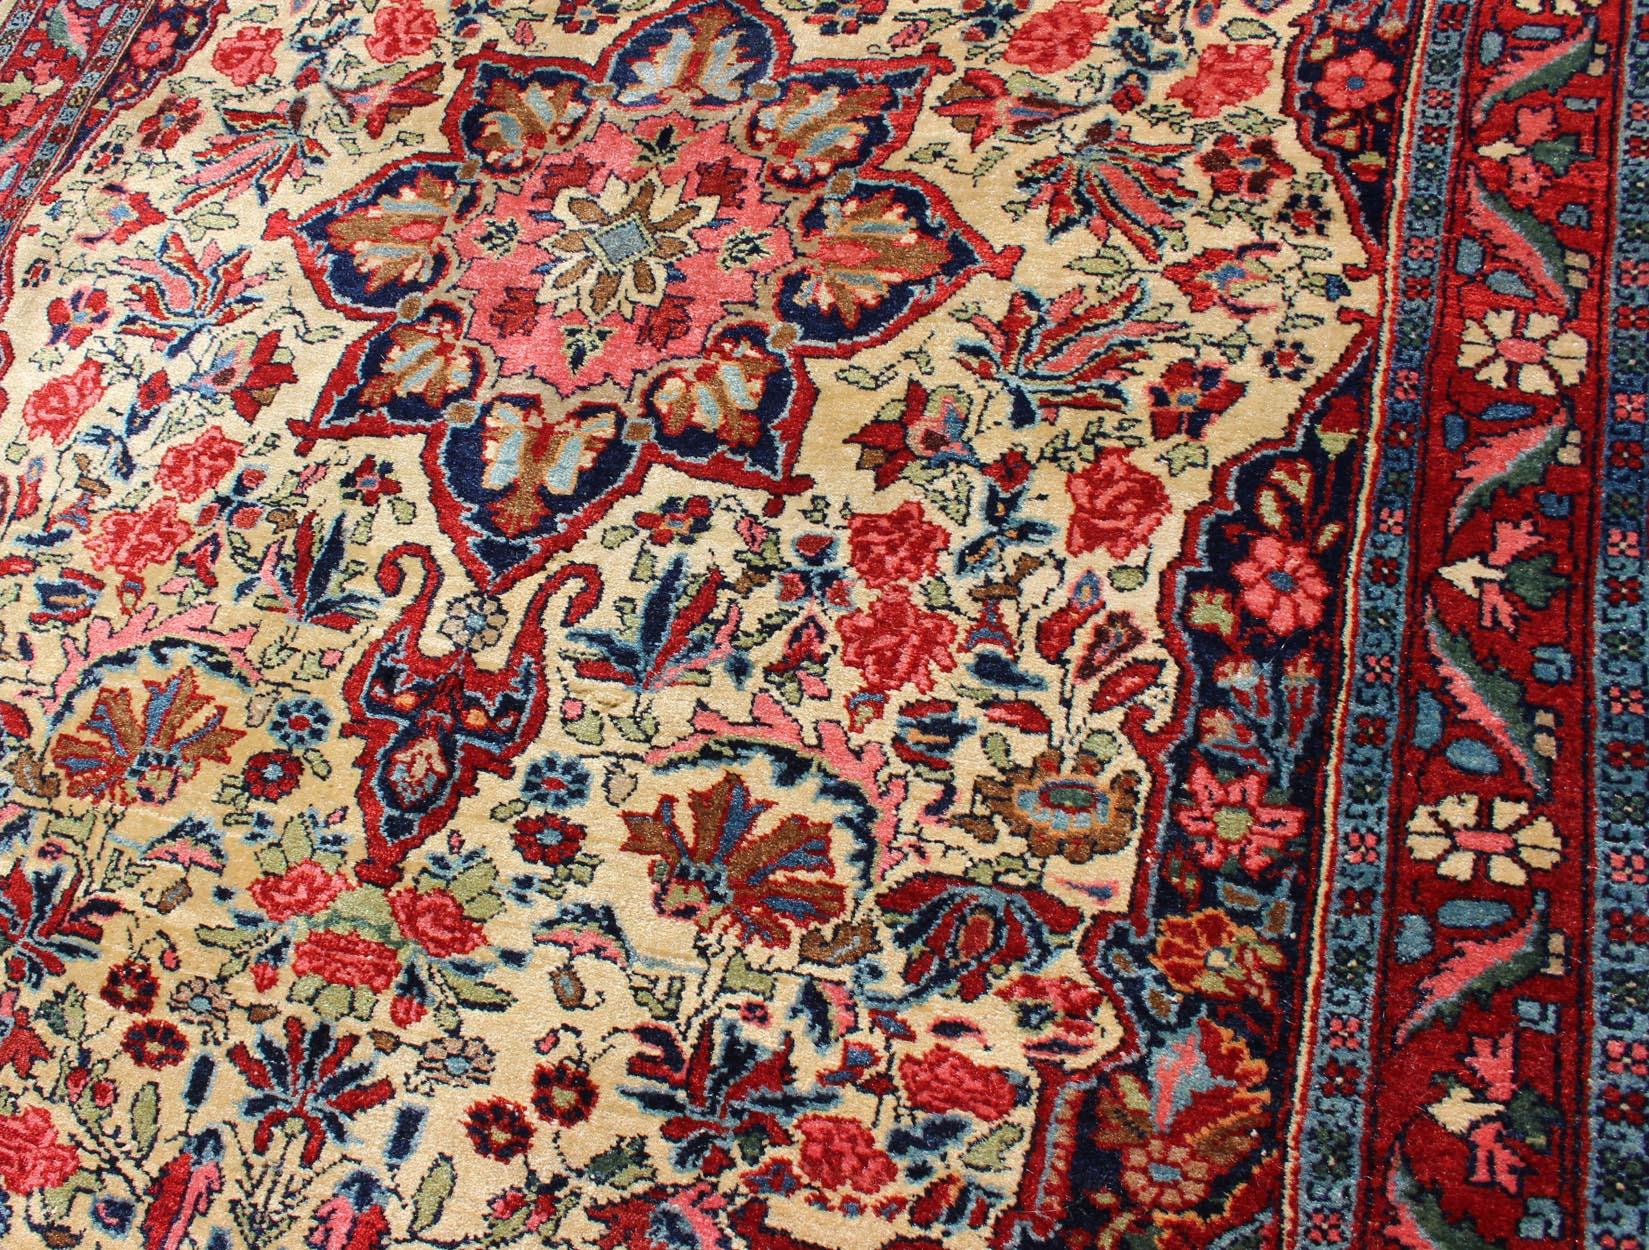 Antique Persian Medallion Bidjar Colorful Rug In Ivory, Navy Blue and Red In Excellent Condition For Sale In Atlanta, GA